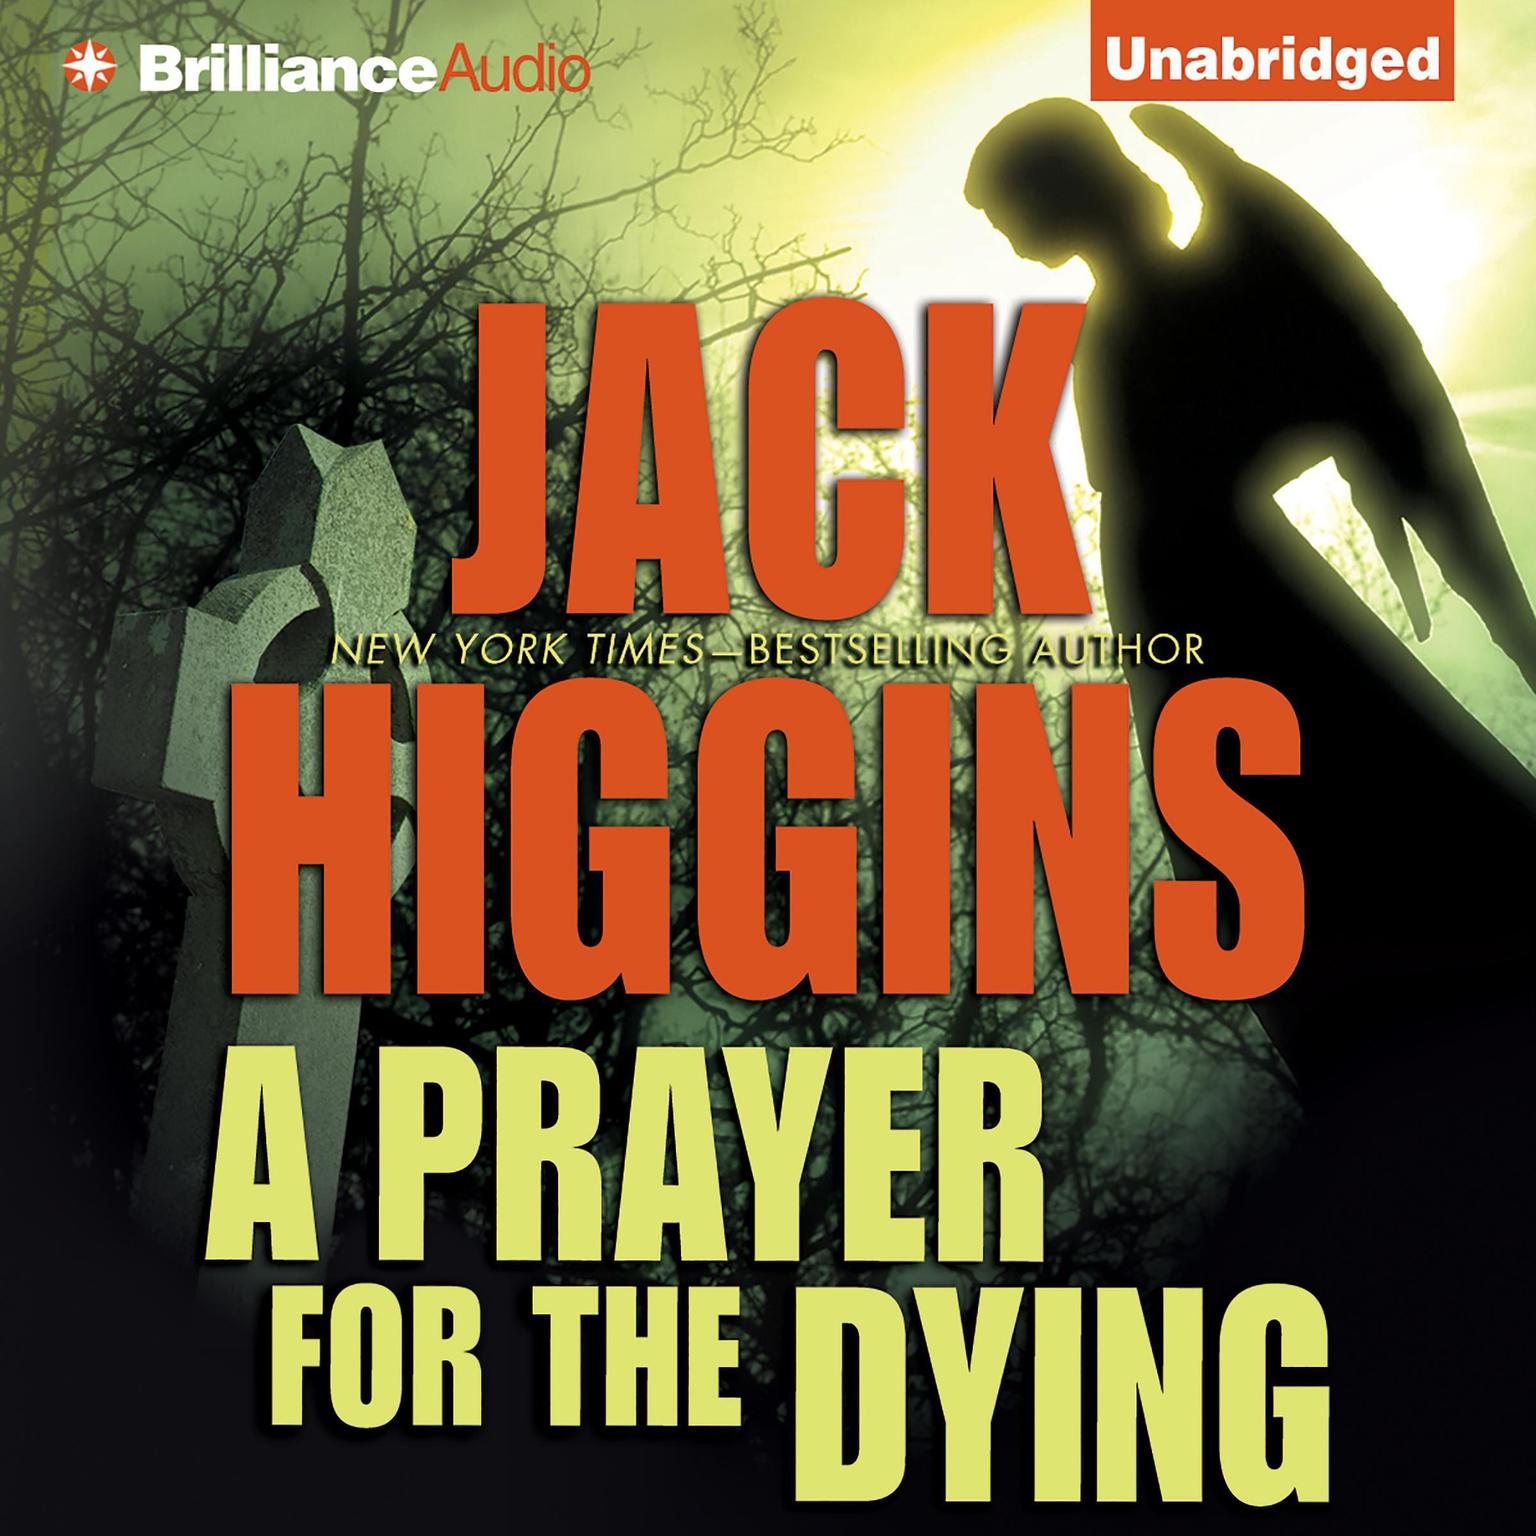 A Prayer for the Dying Audiobook, by Jack Higgins